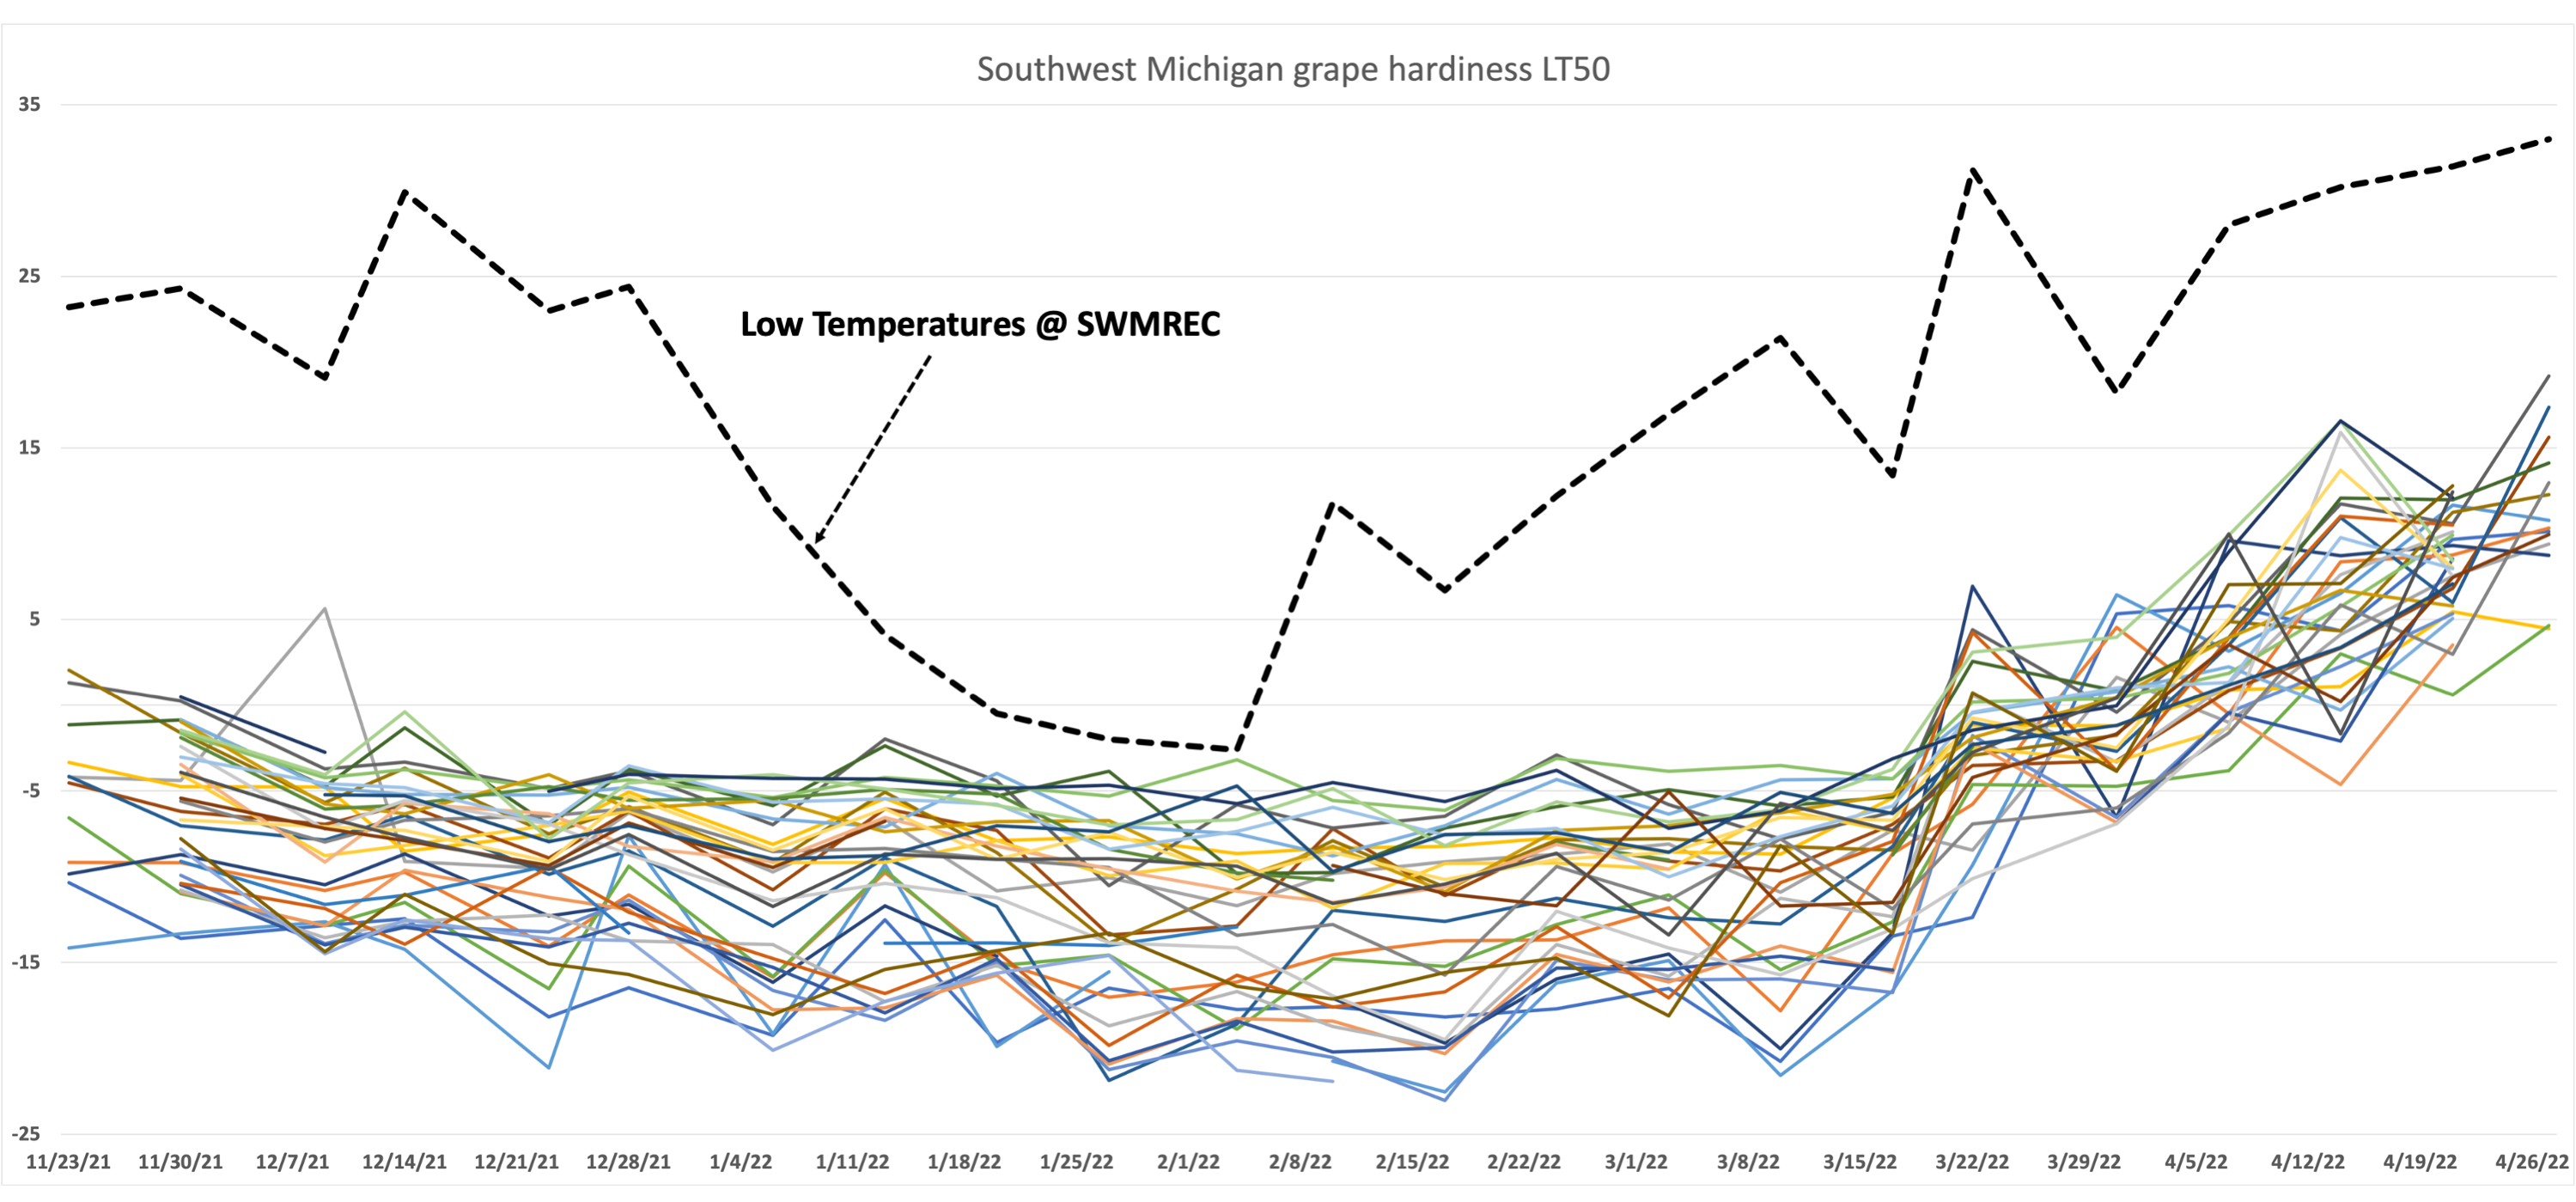 Data from MSU Extension research on winter bud hardiness confirms grower reports of no significant damage from this winter. As an example, here are weekly bud hardiness results from 35 varieties/locations in southwest Michigan showing the LT50 (lethal temperature that kills 50% of the grape buds). The low temperatures for the same periods are also shown. The temperatures never dropped below the LT50 temperature, indicating no significant damage should have occurred.